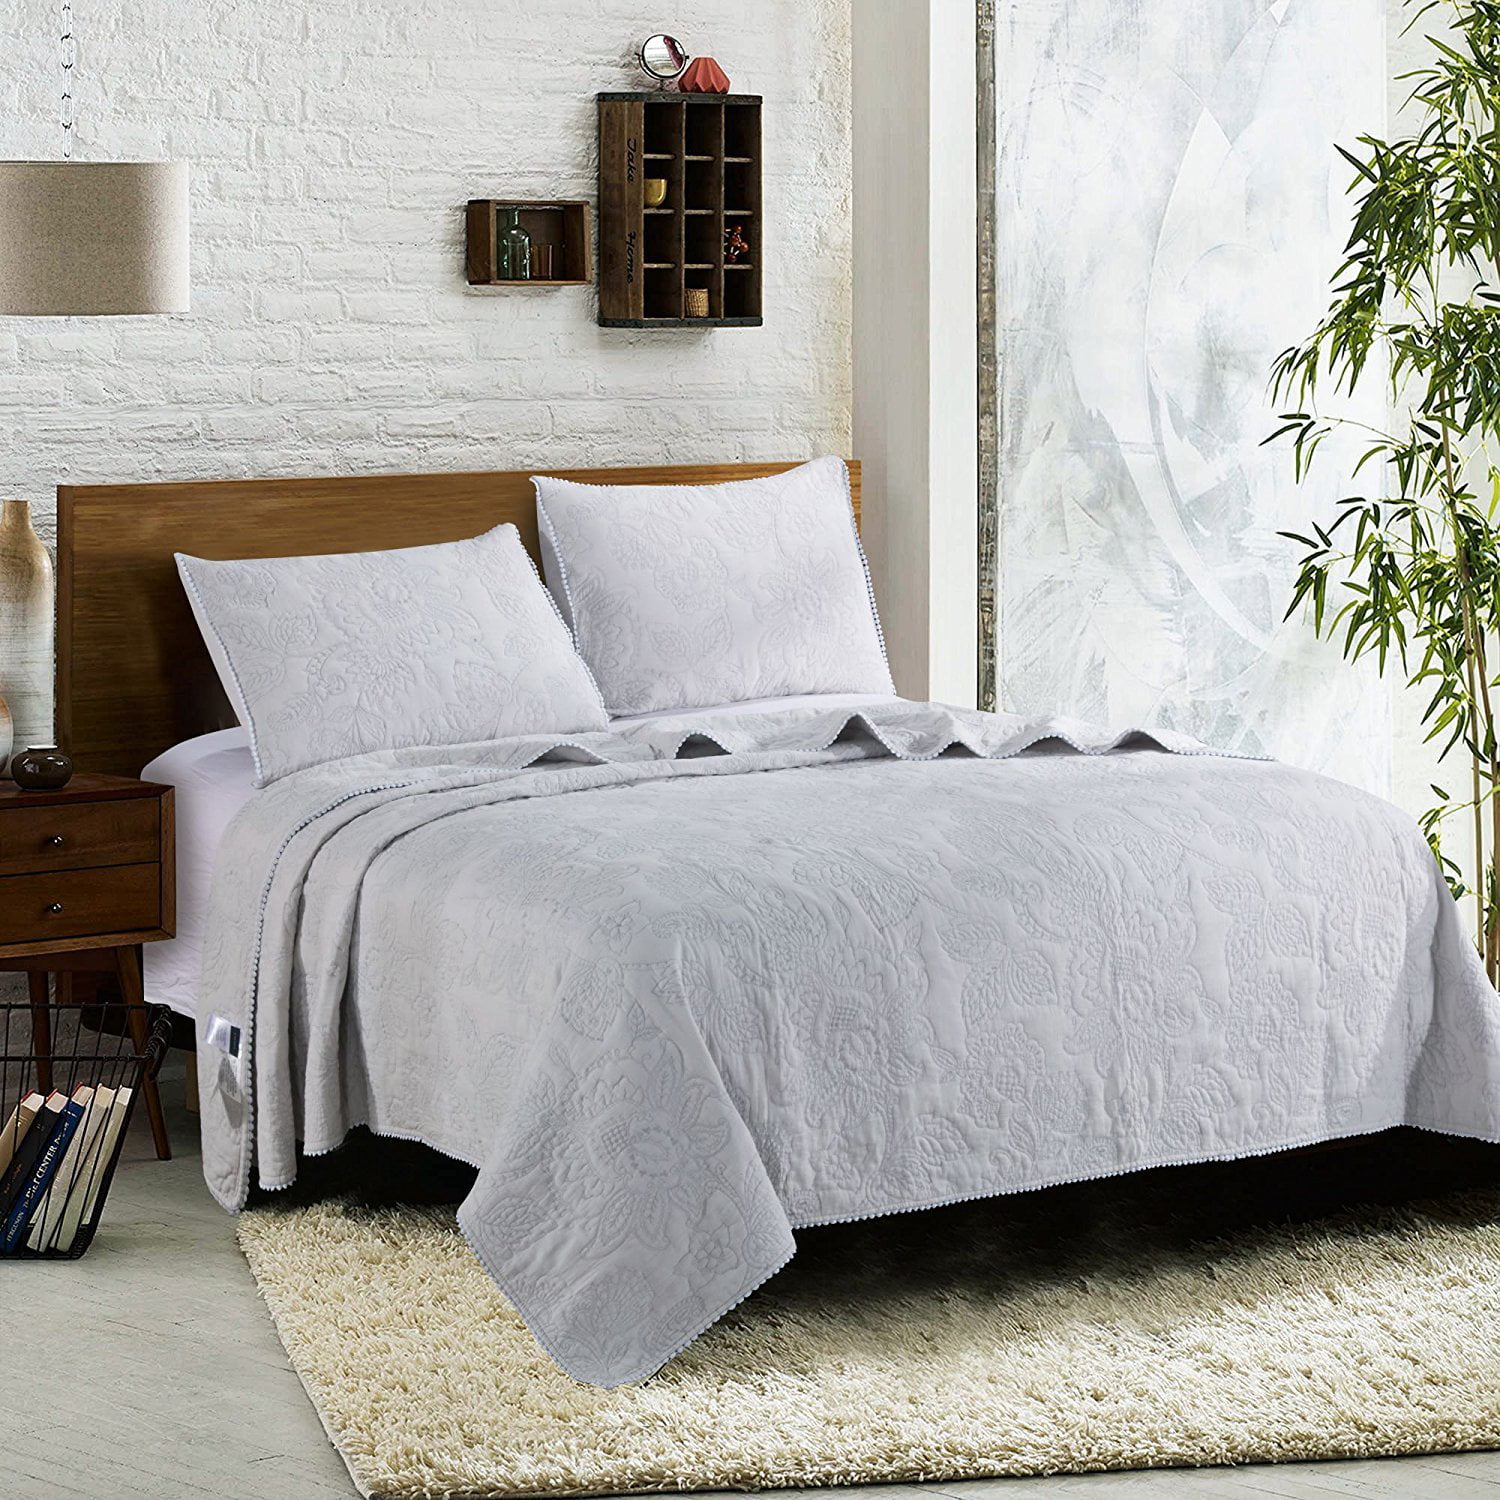 Kasentex Ultra Soft Stone-Washed Quilt Set 100%Cotton White-Gray Winter 